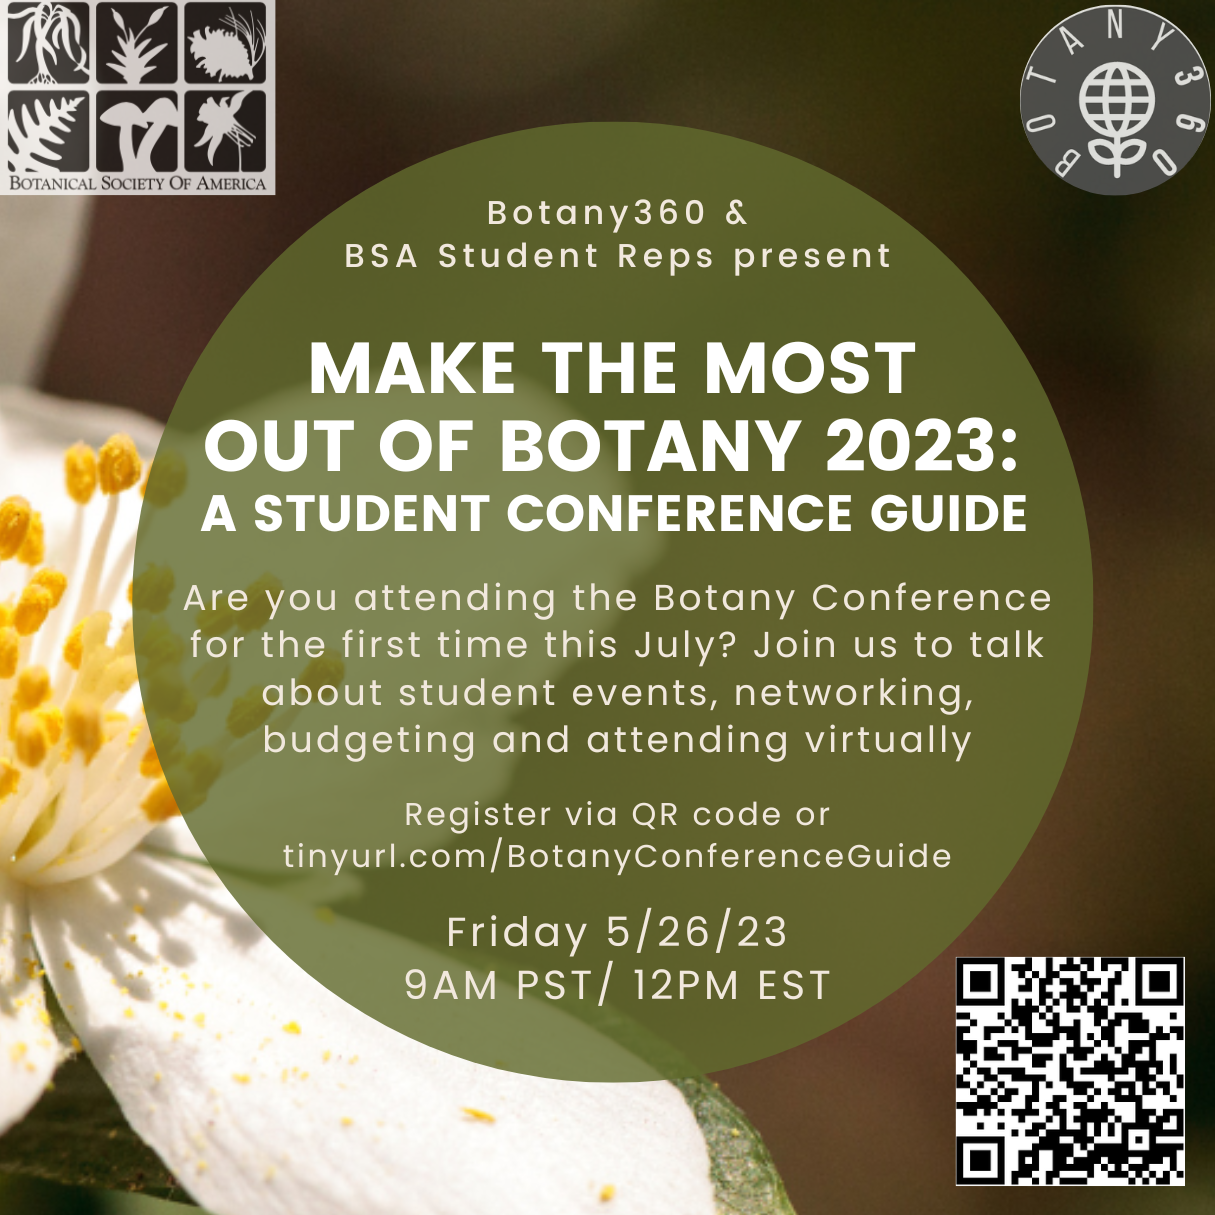 Botany360 Event: Making the most out of Botany 2023 - A Student Conference Guide 